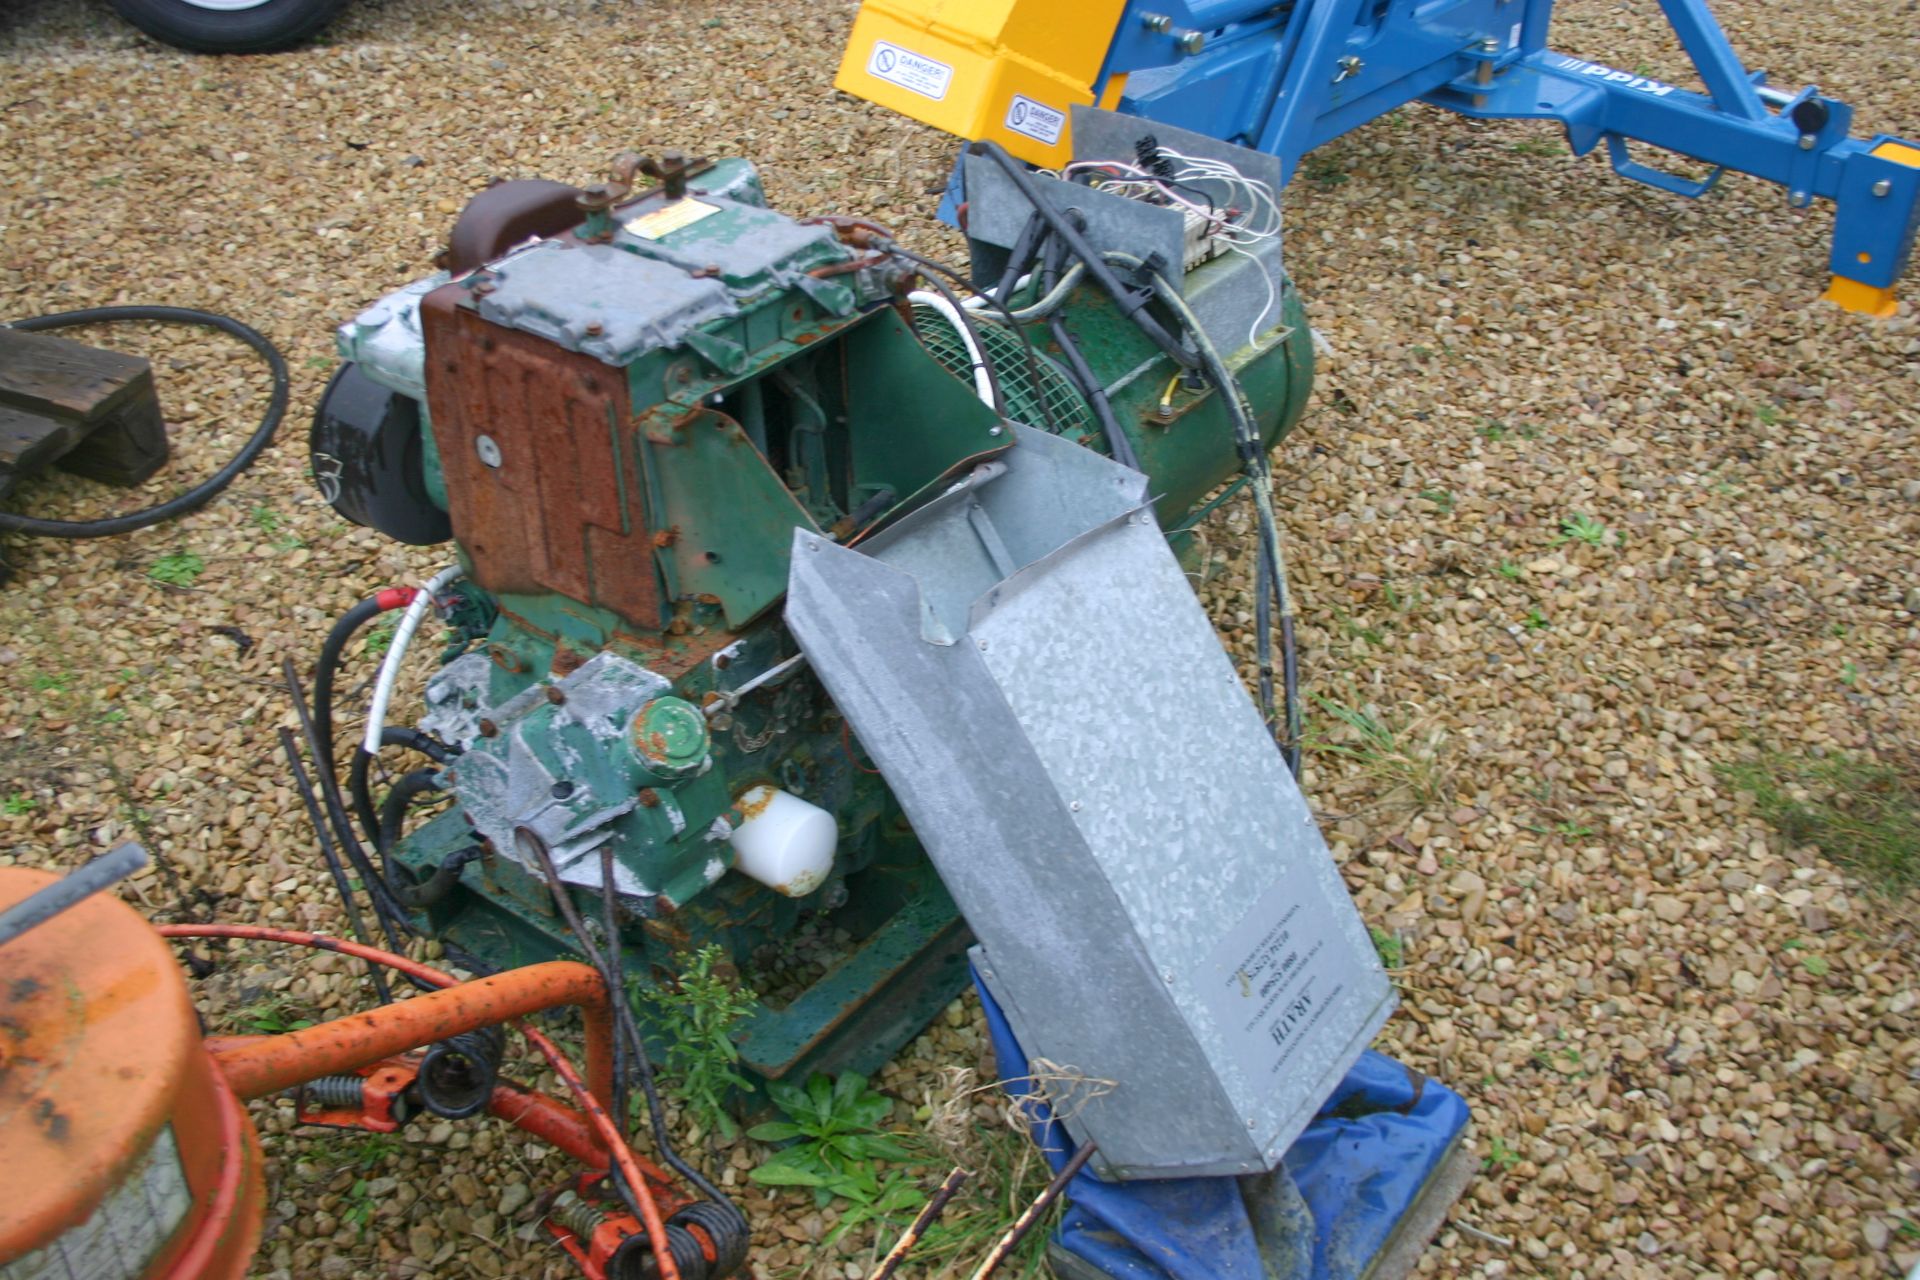 LEROY SOMER LISTER GENERATOR, 9.2 KVA 240 VOLT, FITTED WITH LISTER 2 CYLINDER ENGINE, ELECTRIC START - Image 6 of 6